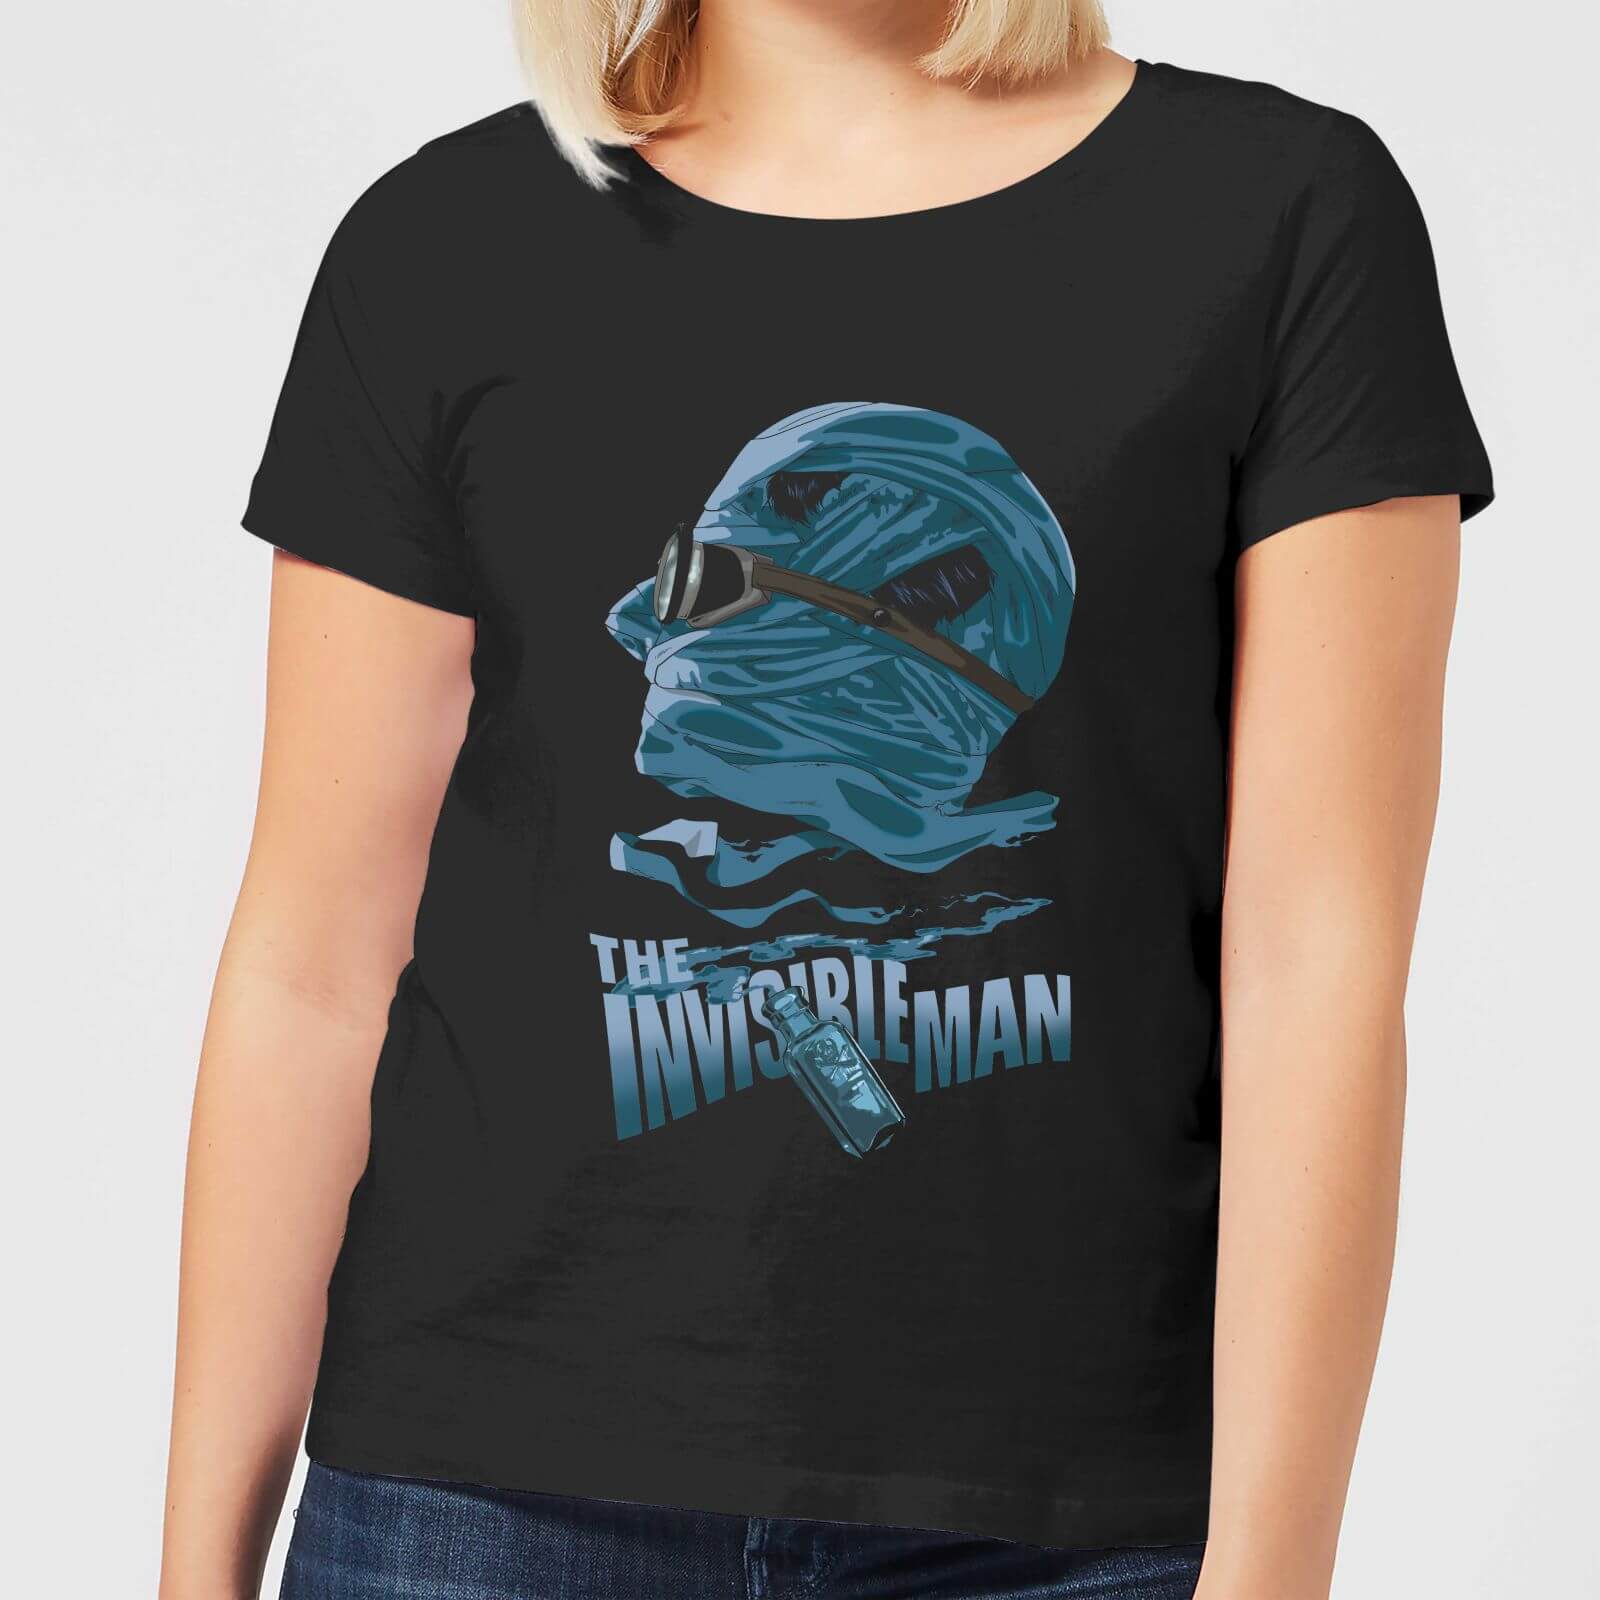 Universal Monsters The Invisible Man Illustrated Women's T-Shirt - Black - 4XL - Black